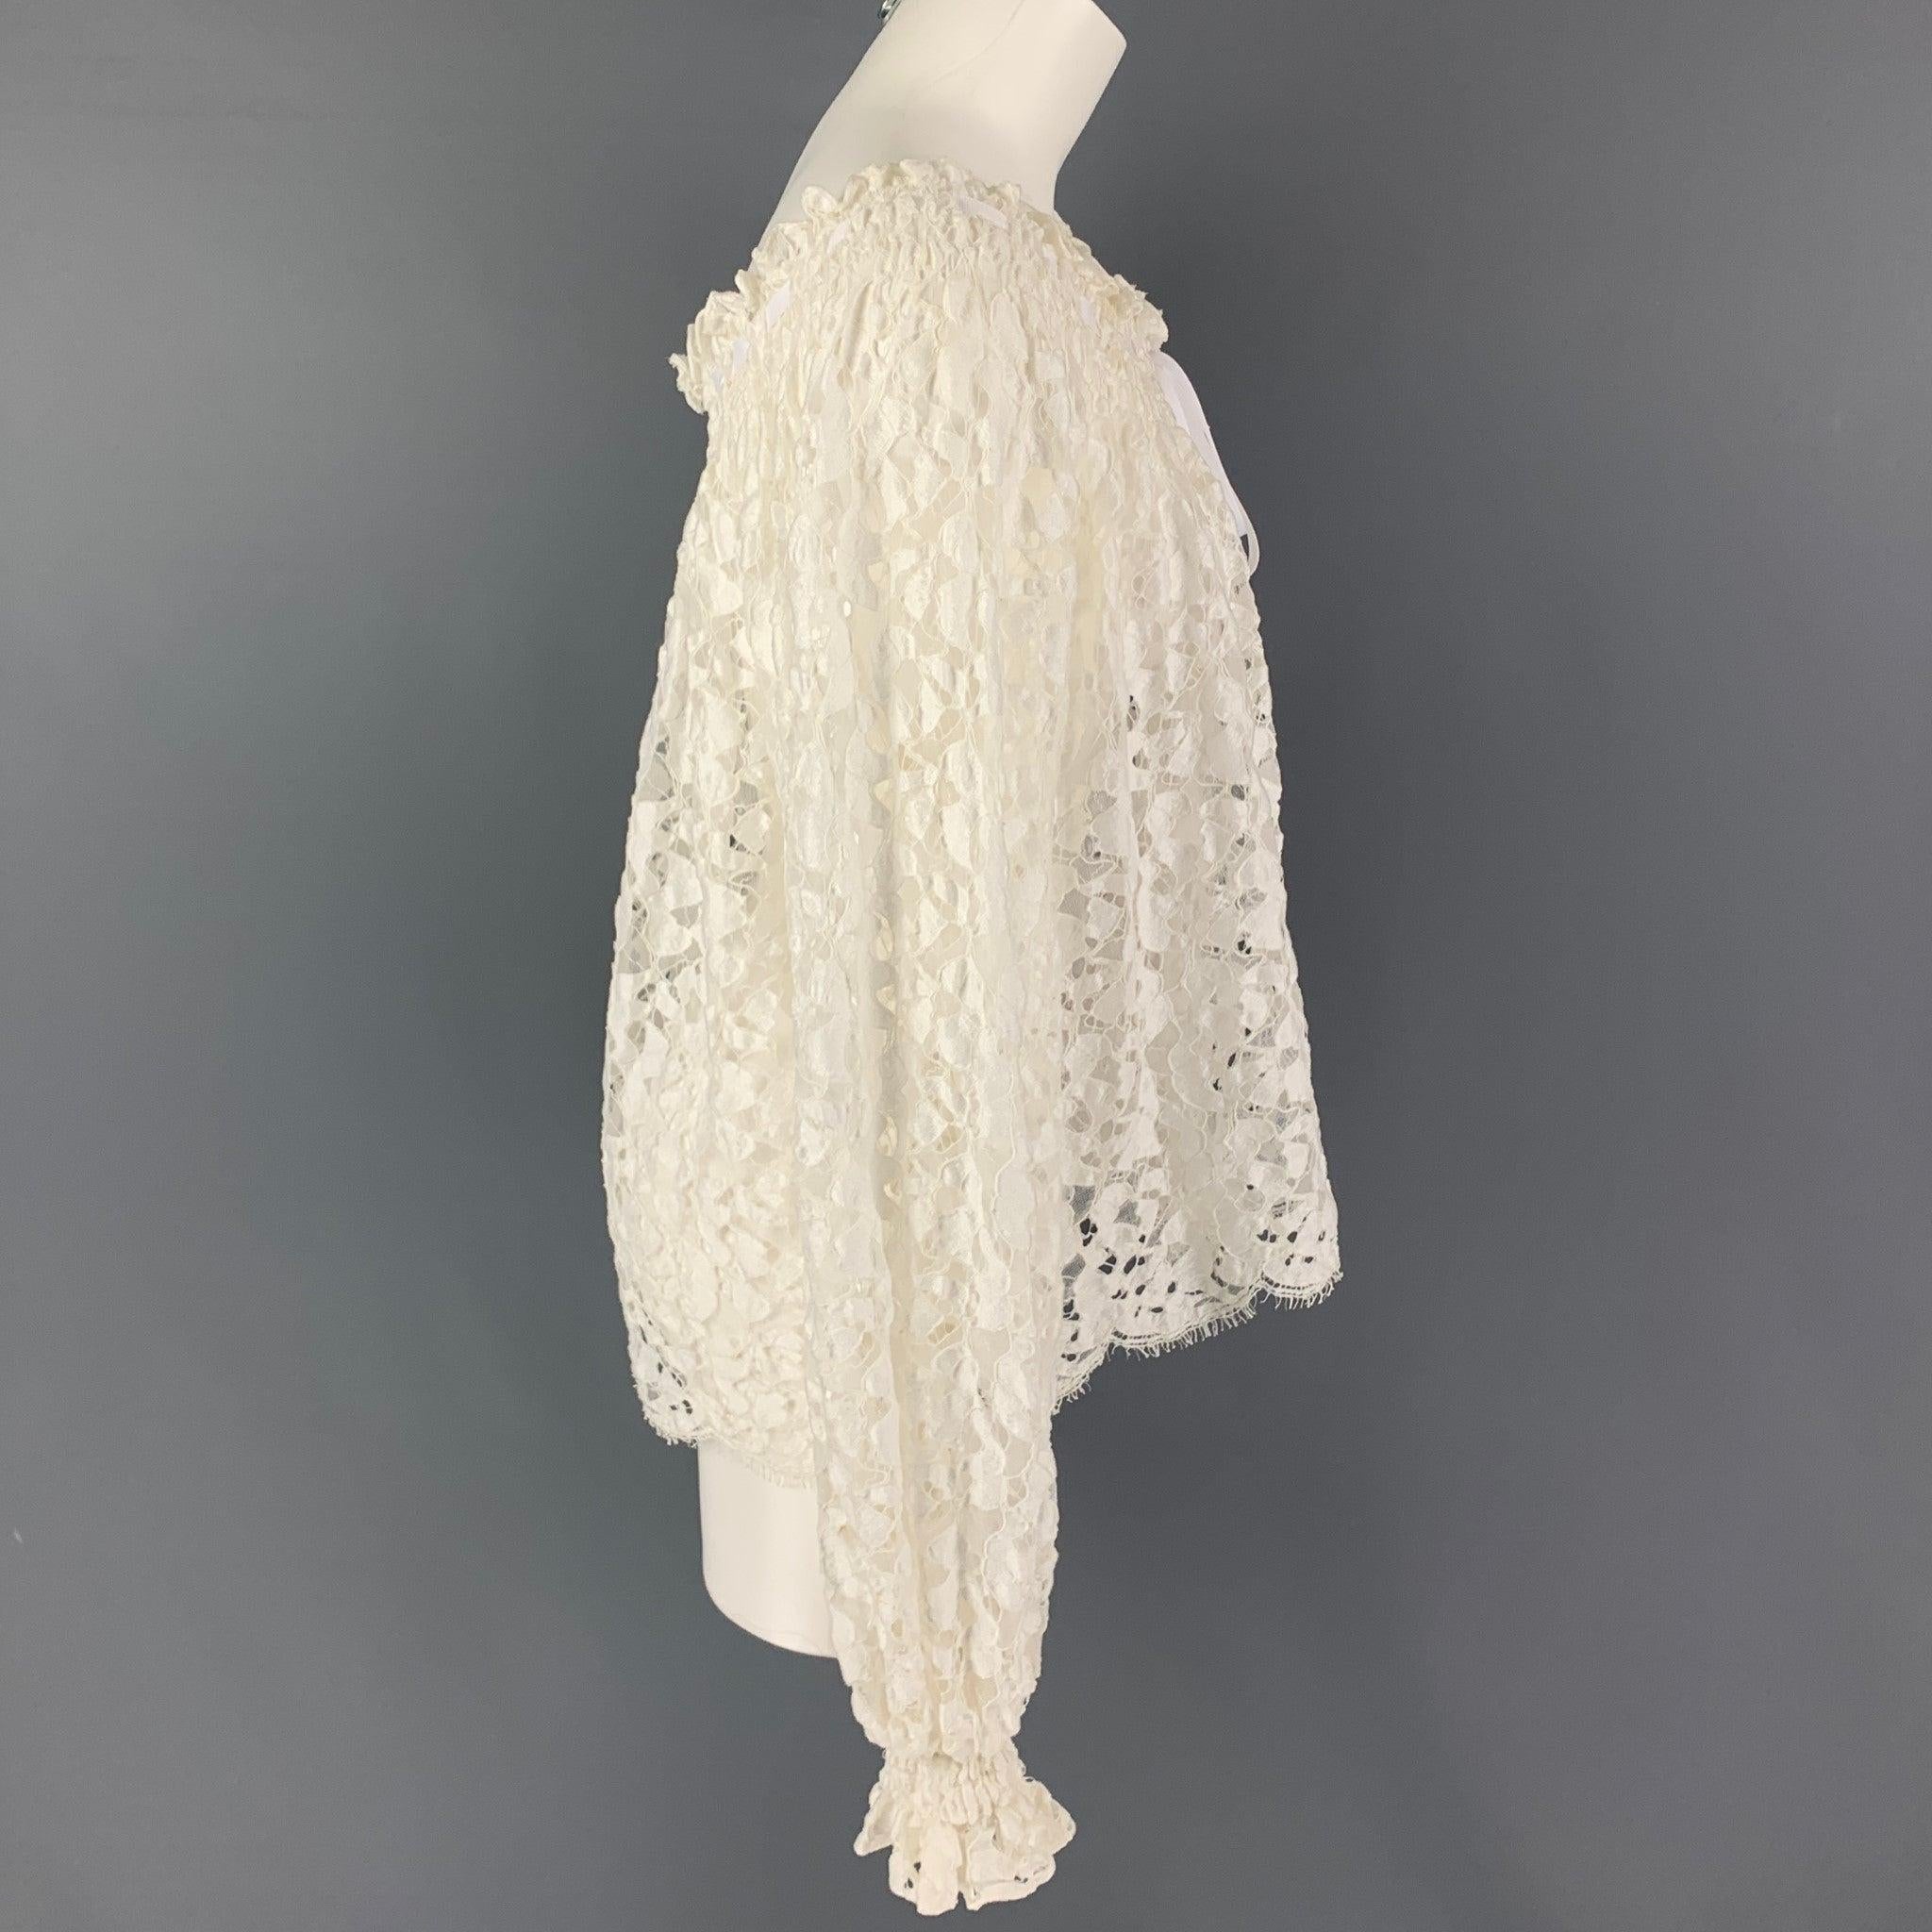 OSCAR DE LA RENTA dress top comes in a white see through lace cotton blend featuring a self tie ribbon design.
Good
Pre-Owned Condition. Light discoloration at front.  

Marked:   4 

Measurements: 
 
Shoulder: 16 inches  Bust: 42 inches  Sleeve: